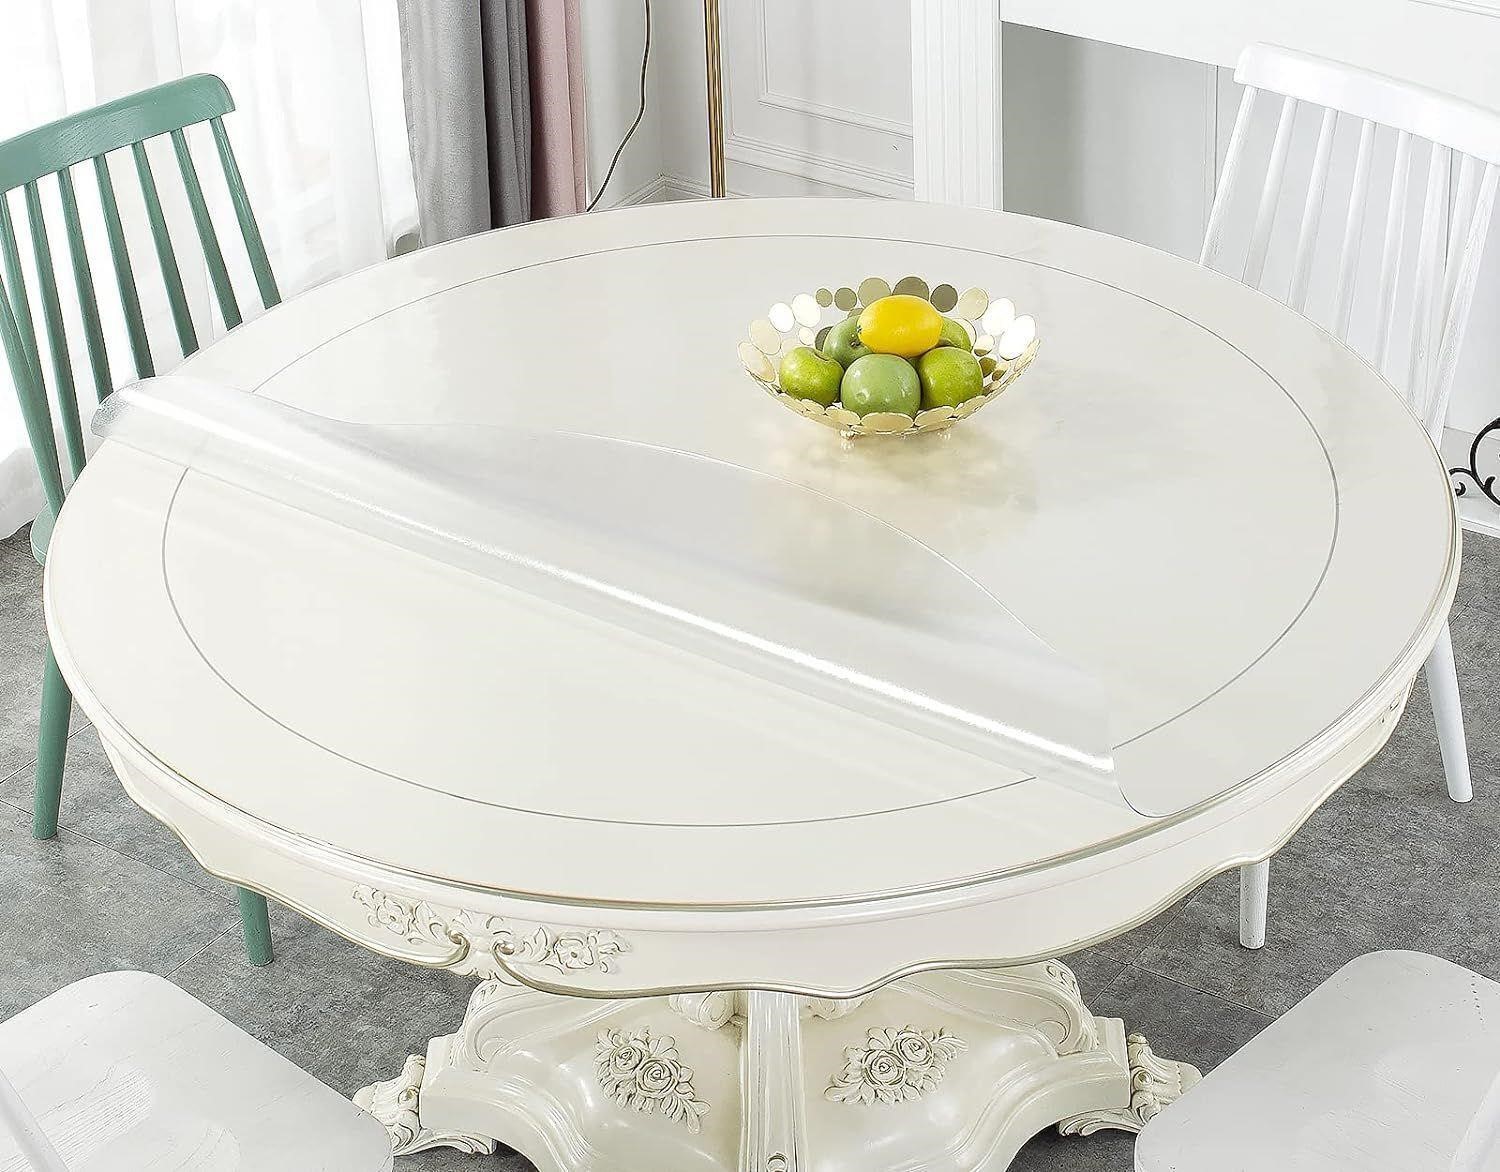 66" Frosted Round Table Protector